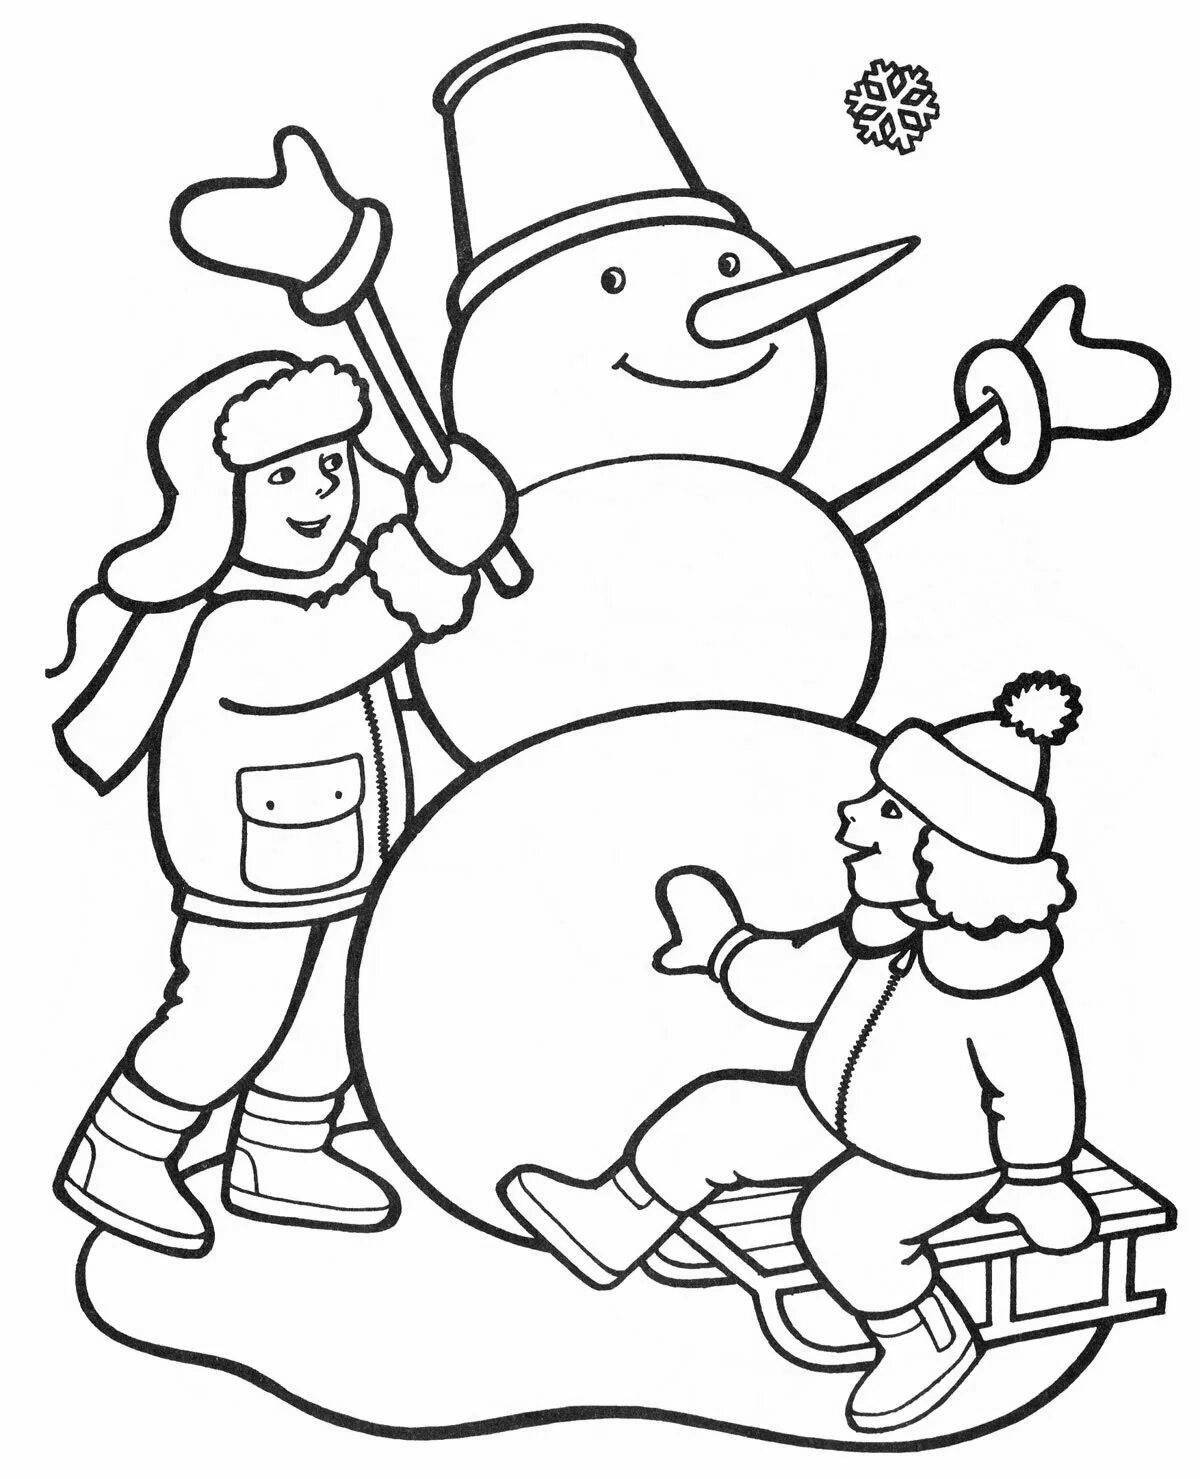 Great coloring book winter holidays for kids